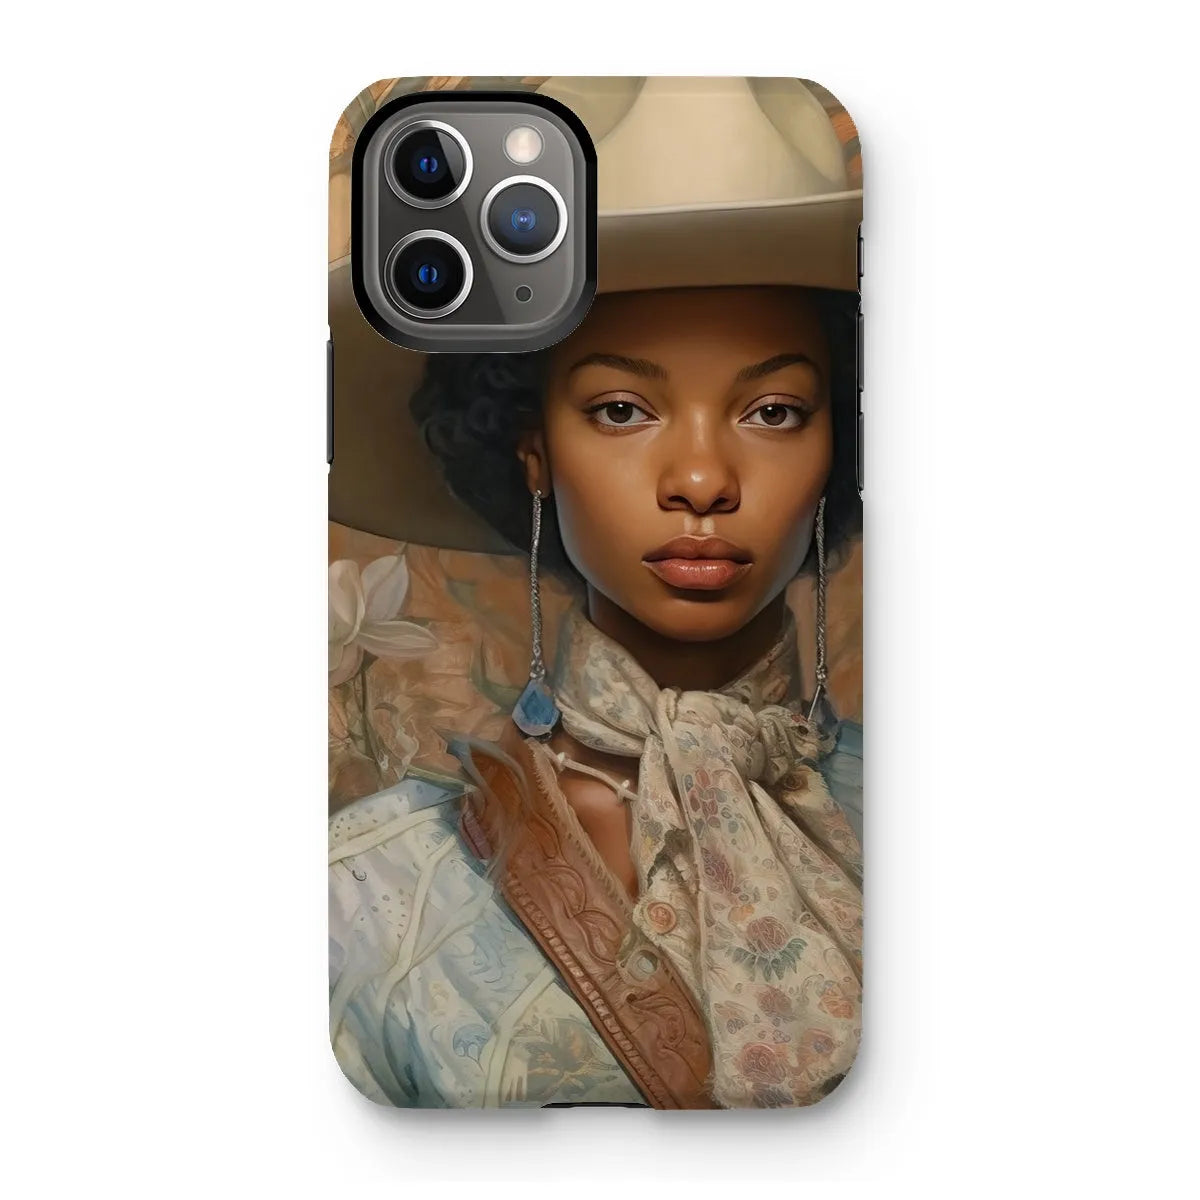 Imani The Lesbian Cowgirl - Sapphic Art Phone Case - Iphone 11 Pro / Matte - Mobile Phone Cases - Aesthetic Art